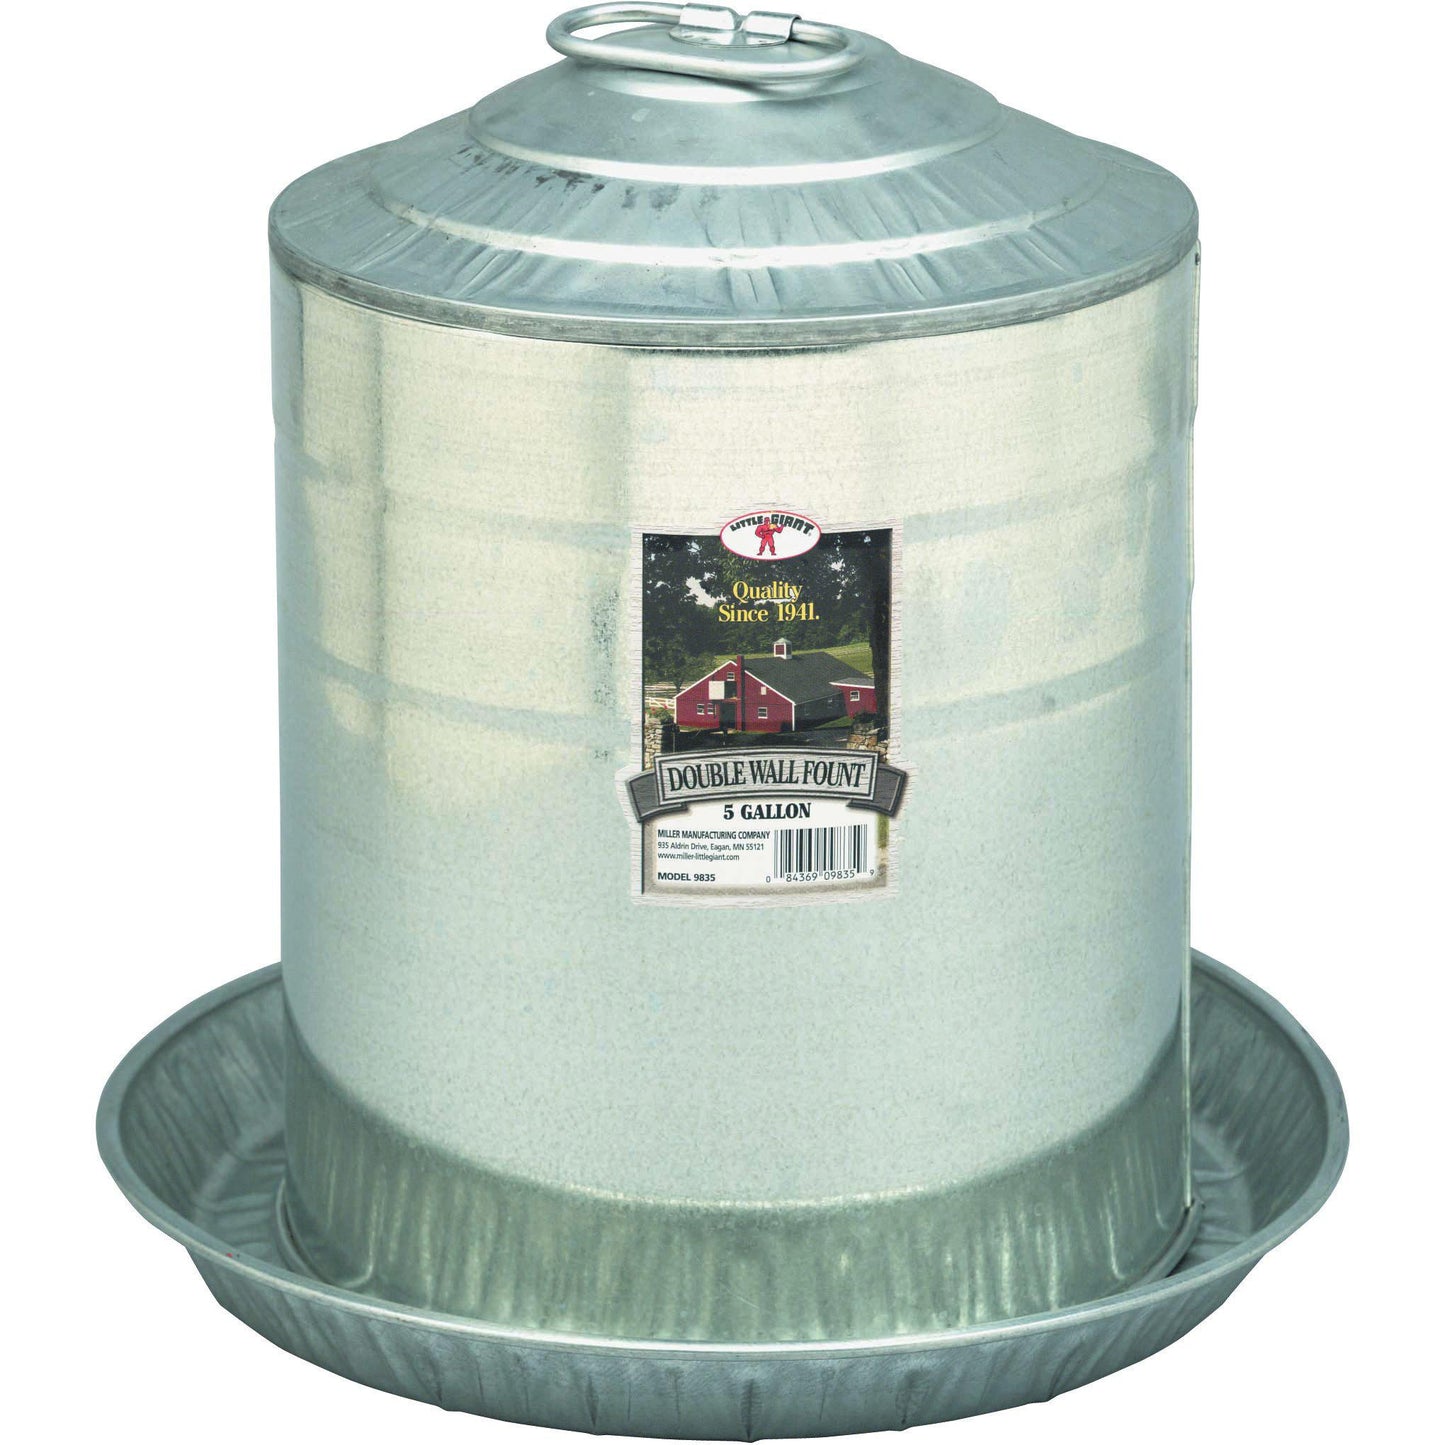 Little Giant® 5 Gallon Double Wall Metal Poultry Fount - Critter Country Supply Ltd.